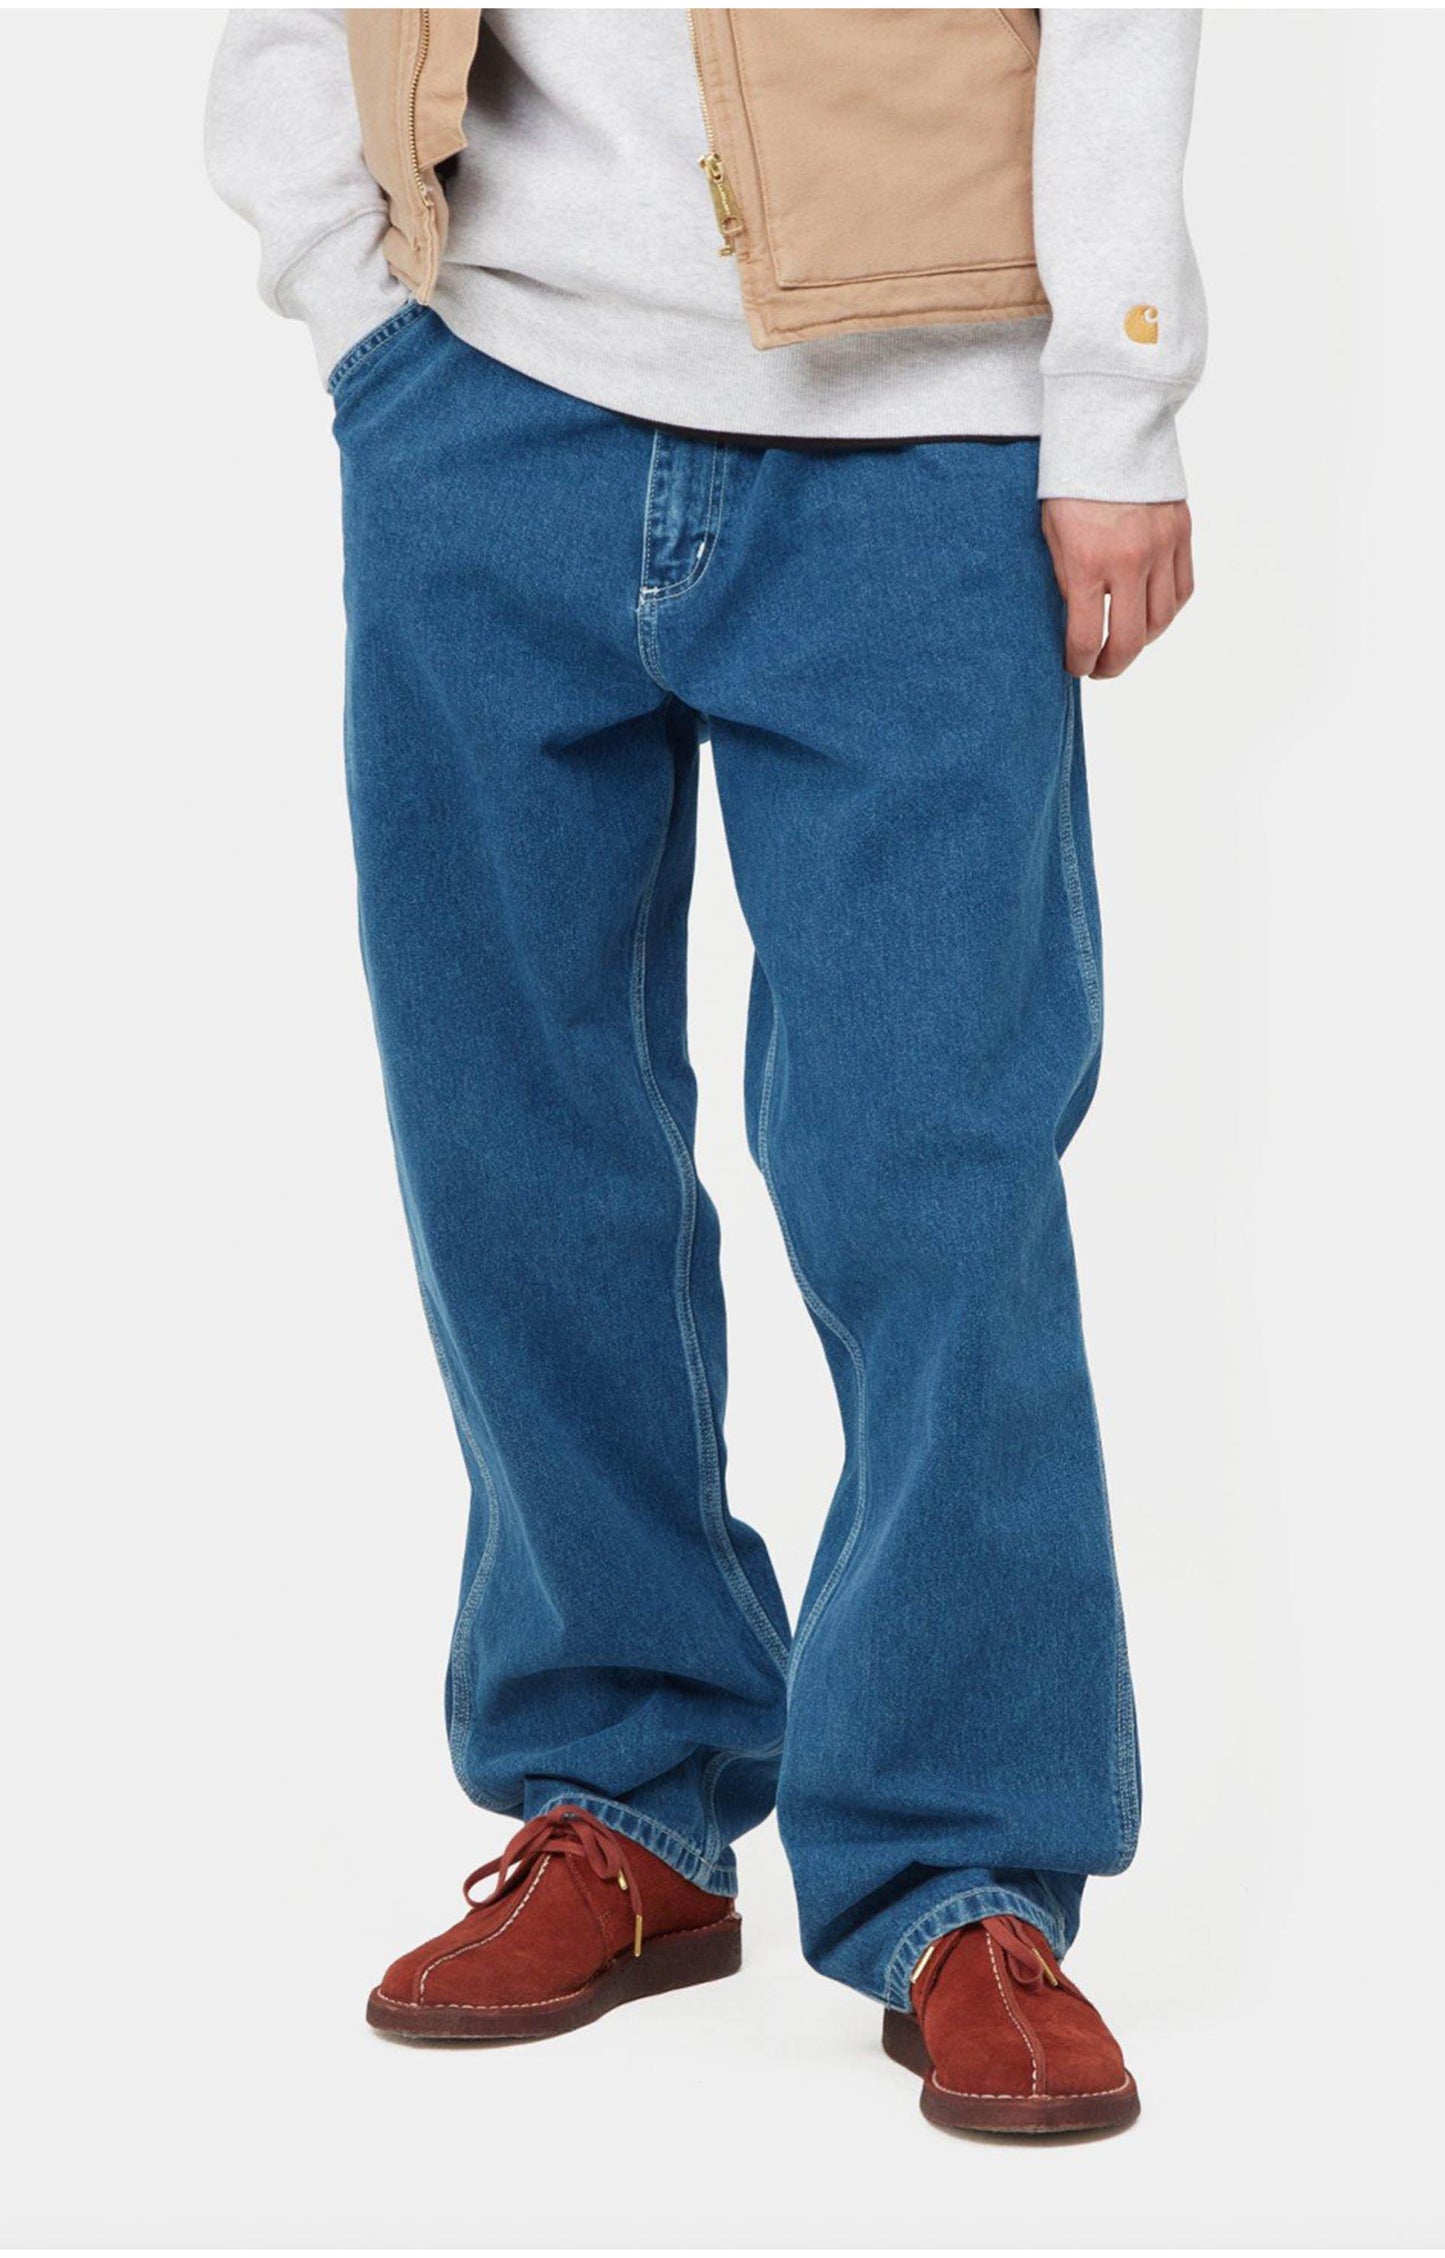 Carhartt WIP Simple Pant, Blue Stone Washed